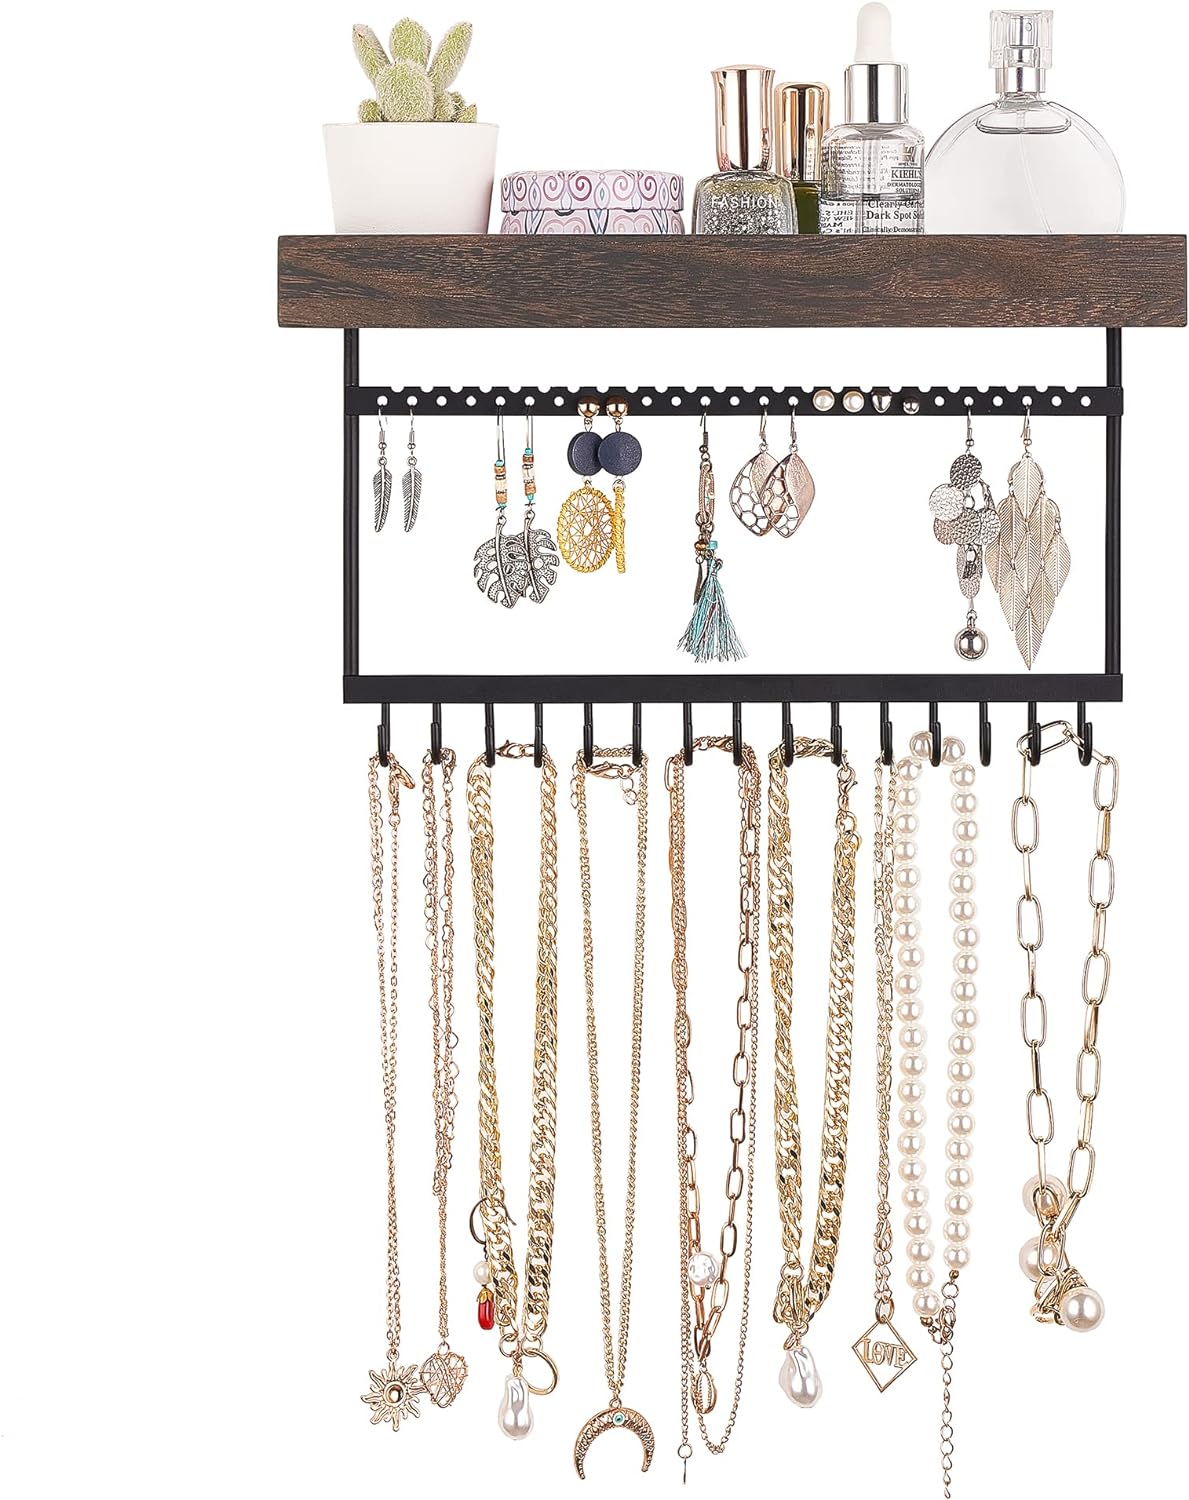 Mkono Hanging Jewelry Organizer Necklace Holder with Hooks Rustic Wall Mount Wood Shelf Jewelry Hanger Display for Earrings Necklaces Bracelet Rings